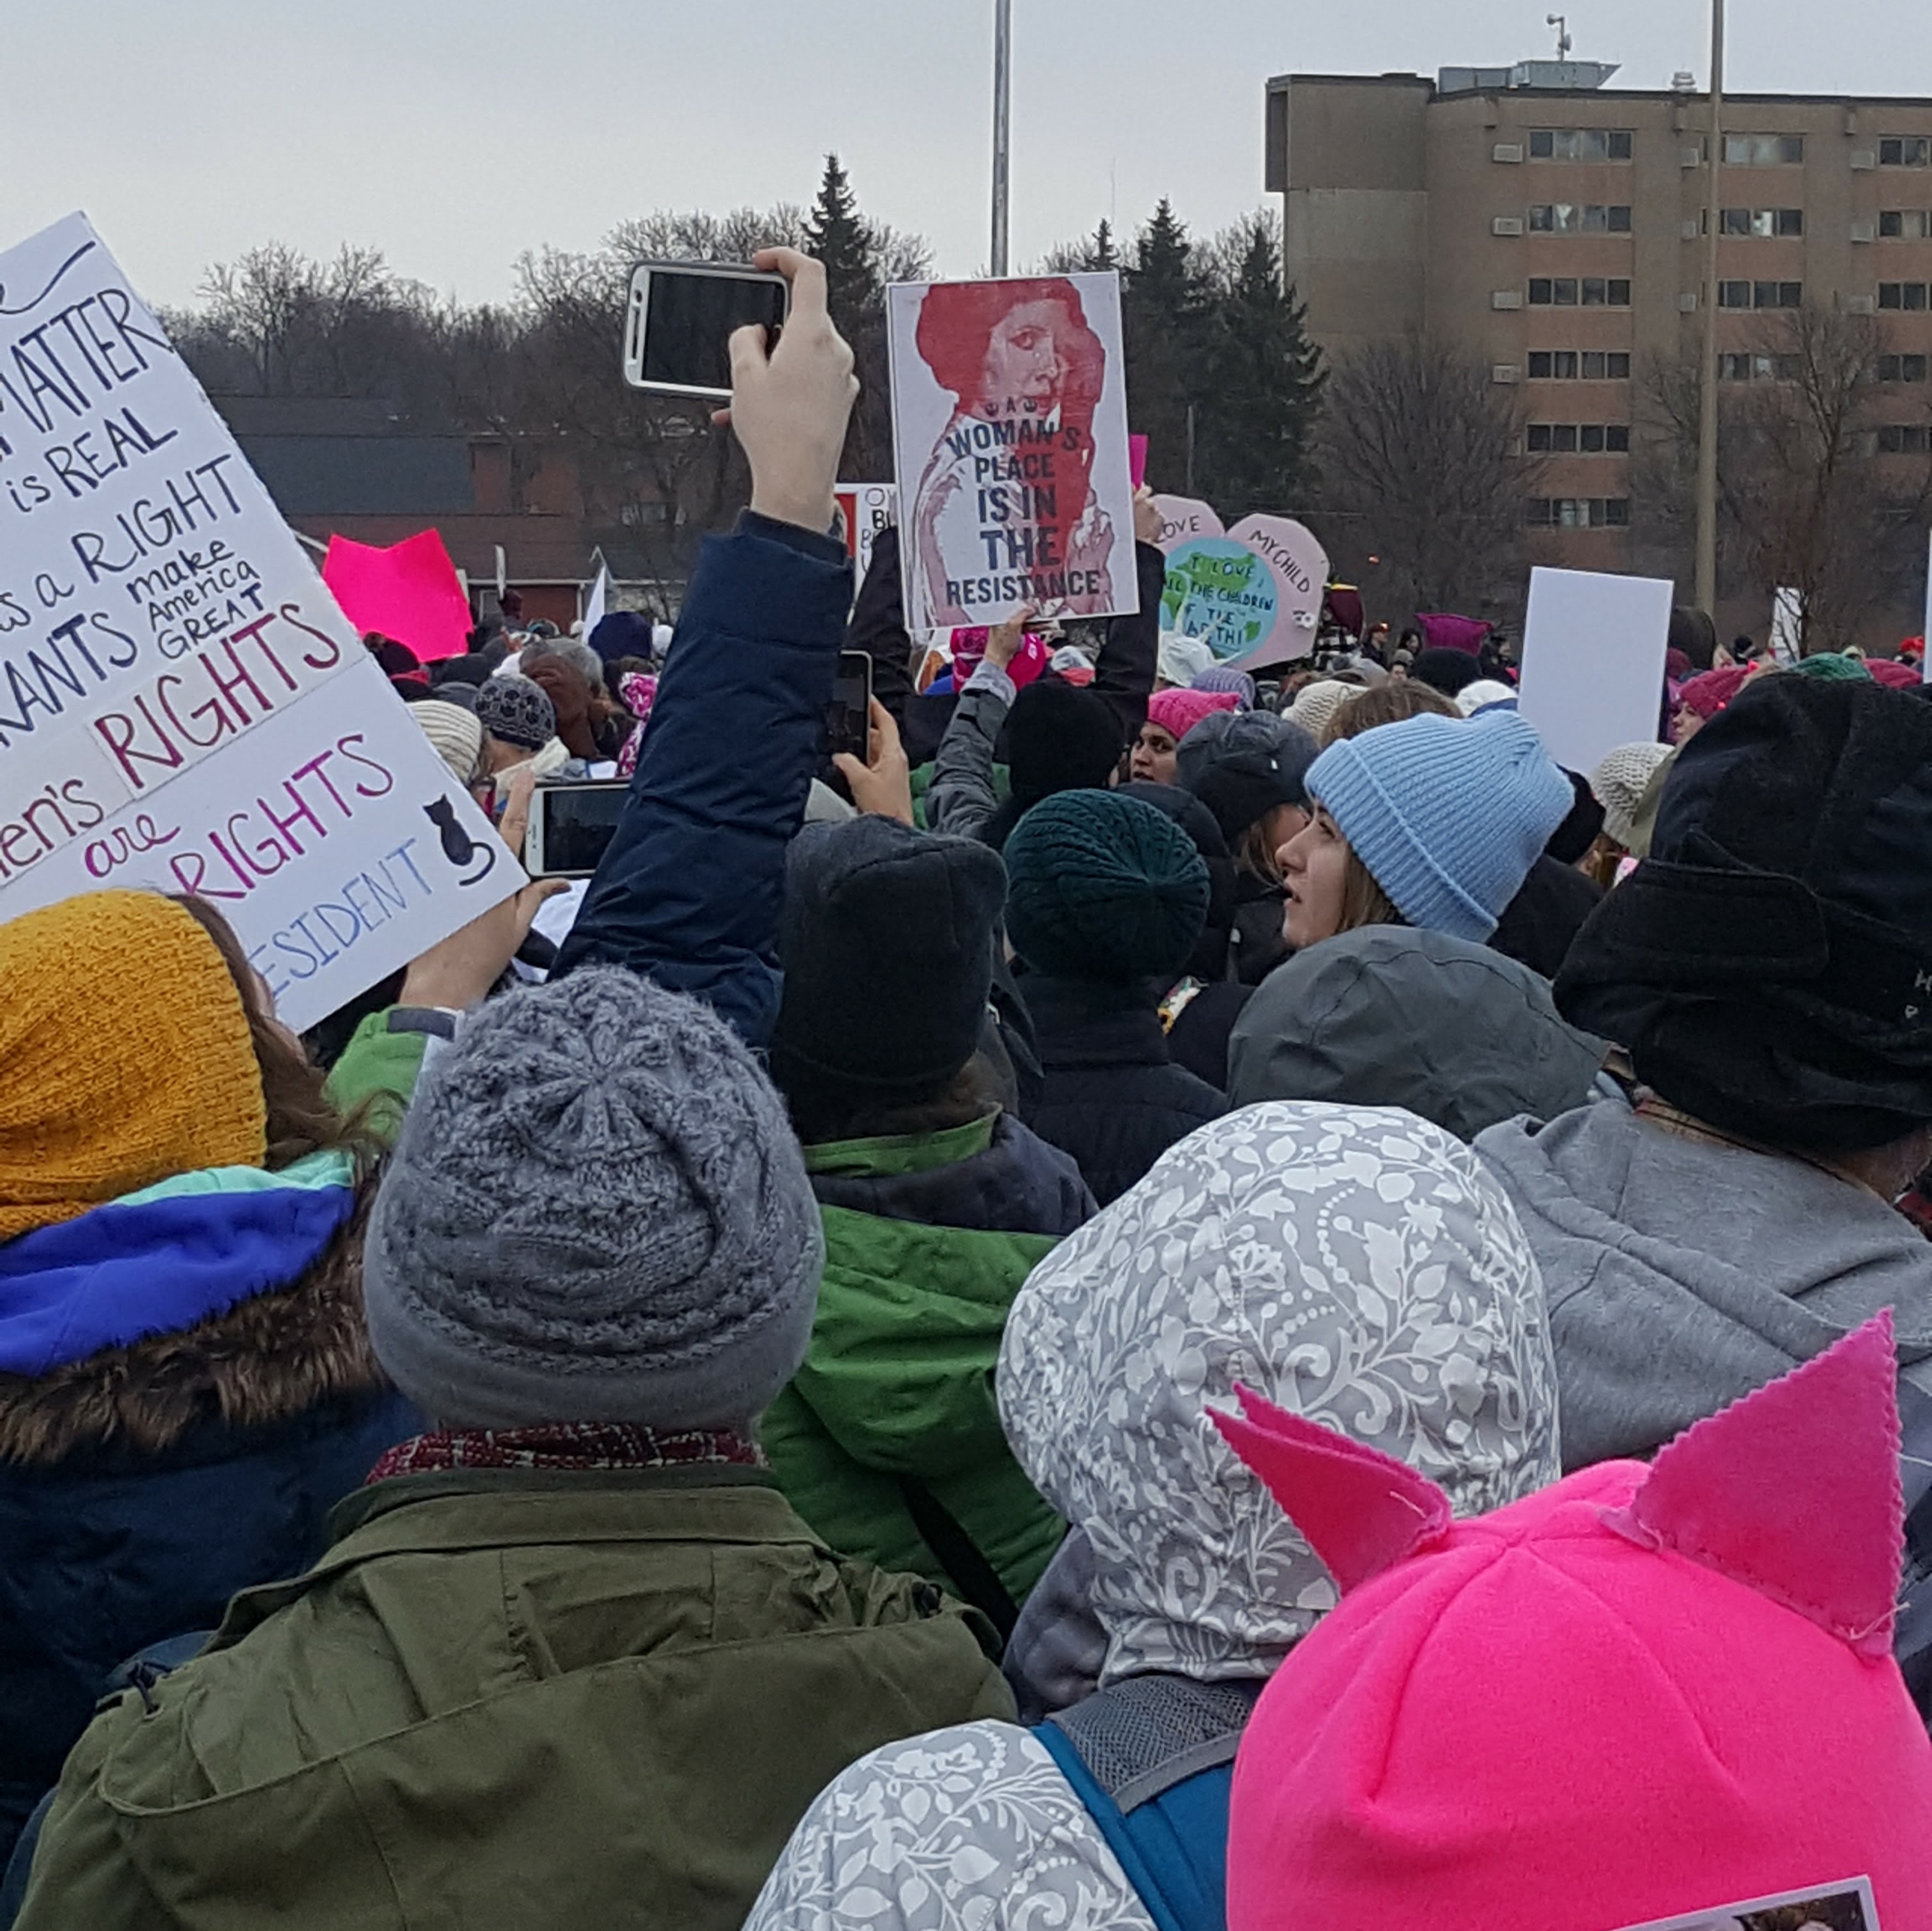 Women's March on Washington: MN. A woman's place is in the resistance.